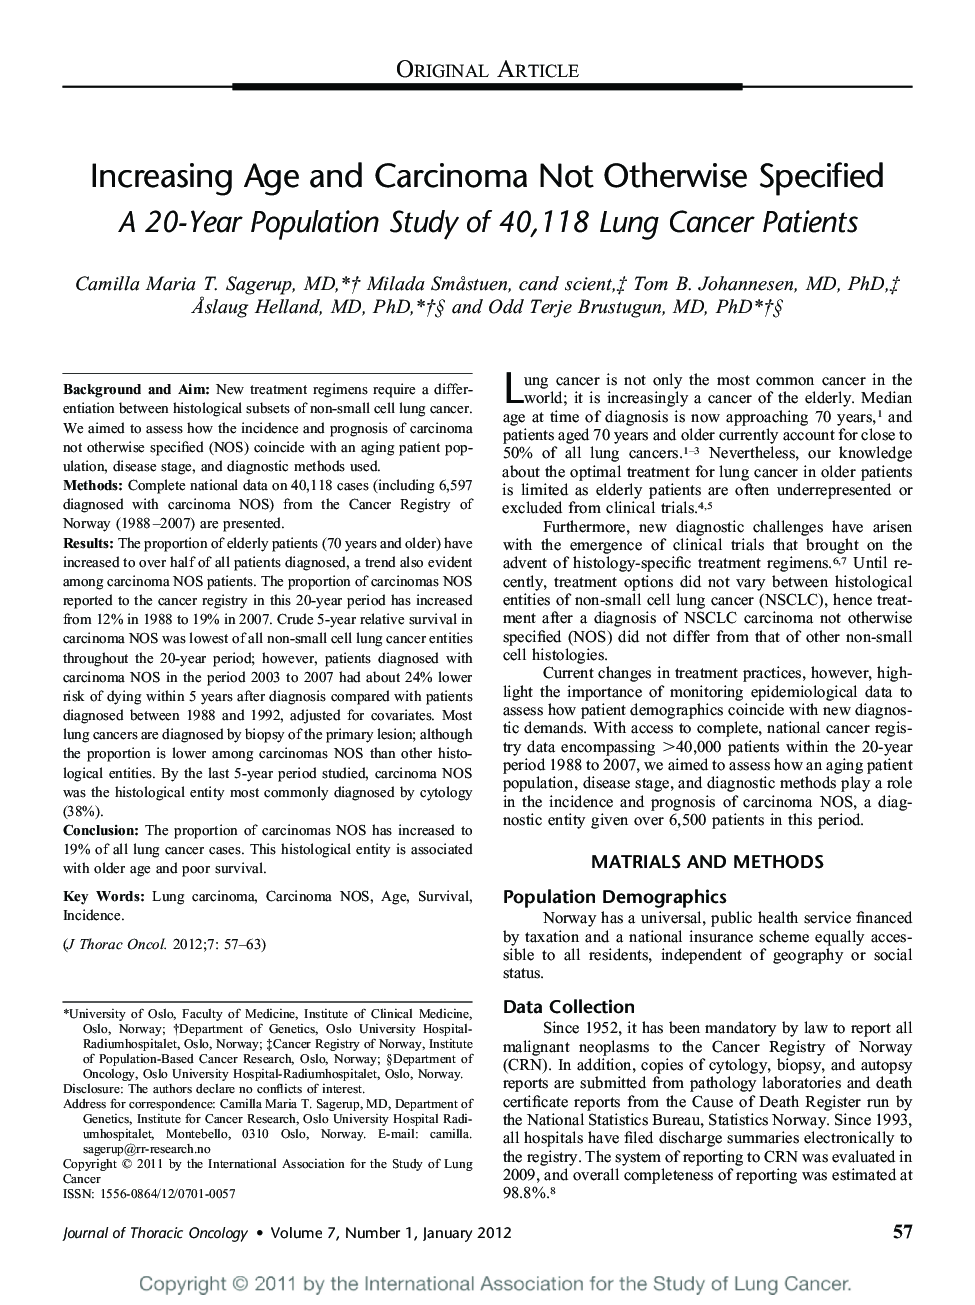 Increasing Age and Carcinoma Not Otherwise Specified: A 20-Year Population Study of 40,118 Lung Cancer Patients 